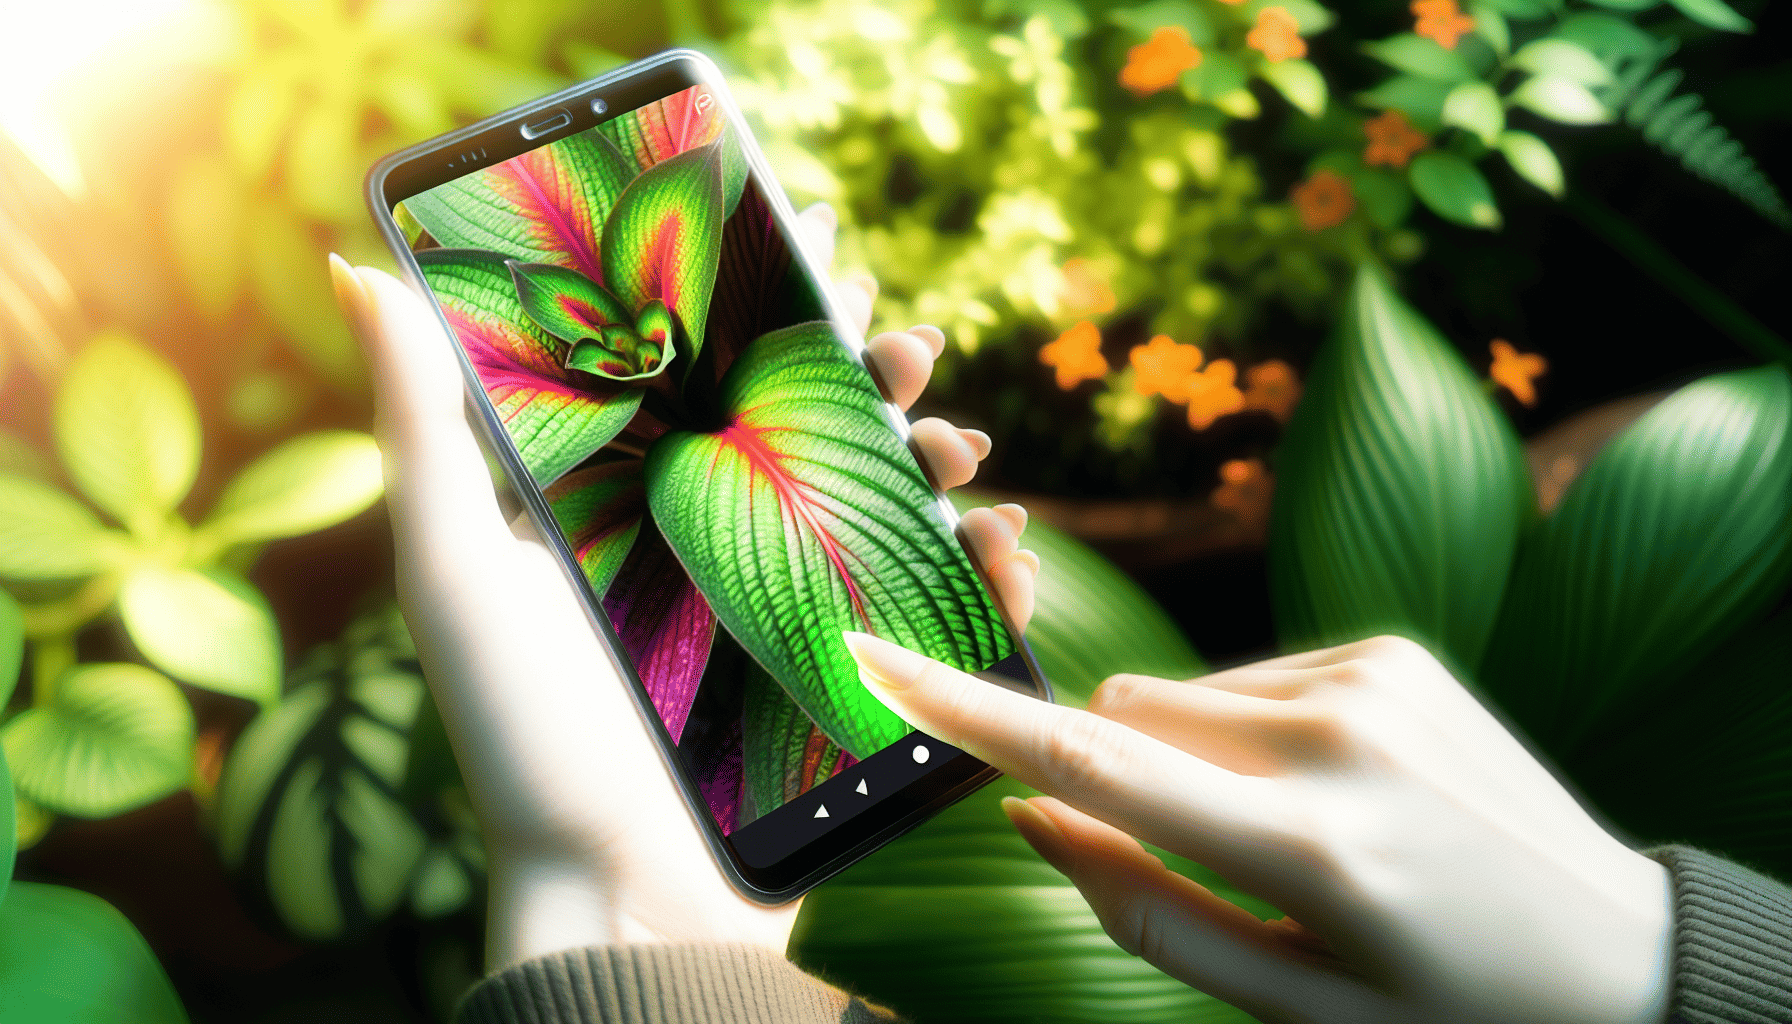 A smartphone capturing an image of a plant for identification